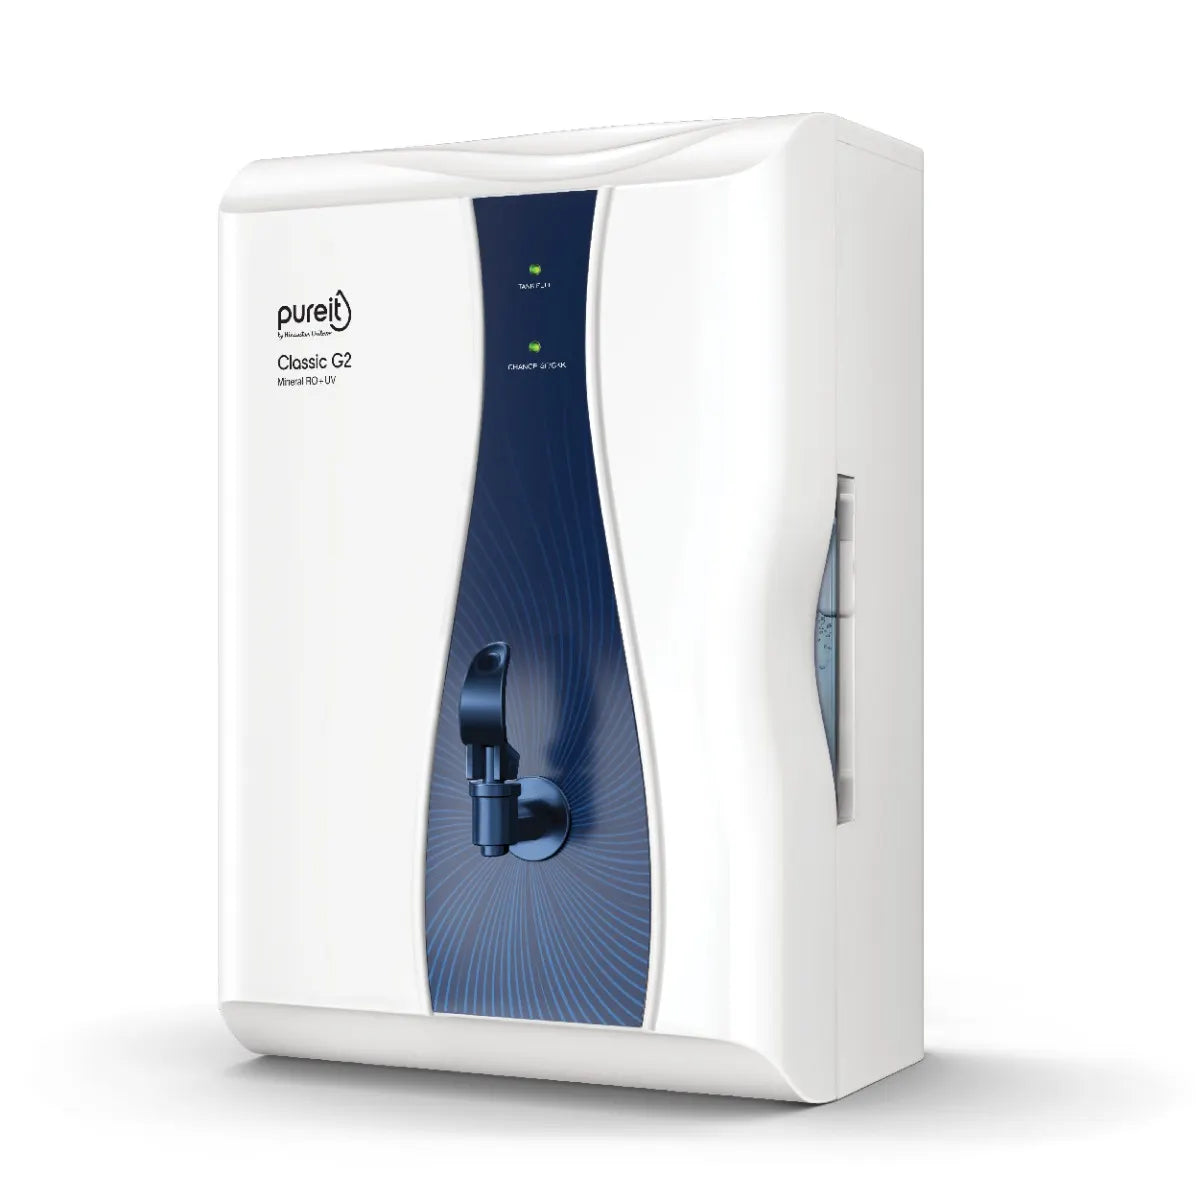 Hindustan Pureit Classic G2 Mineral RO+UV Water Purifier with 6L Storage